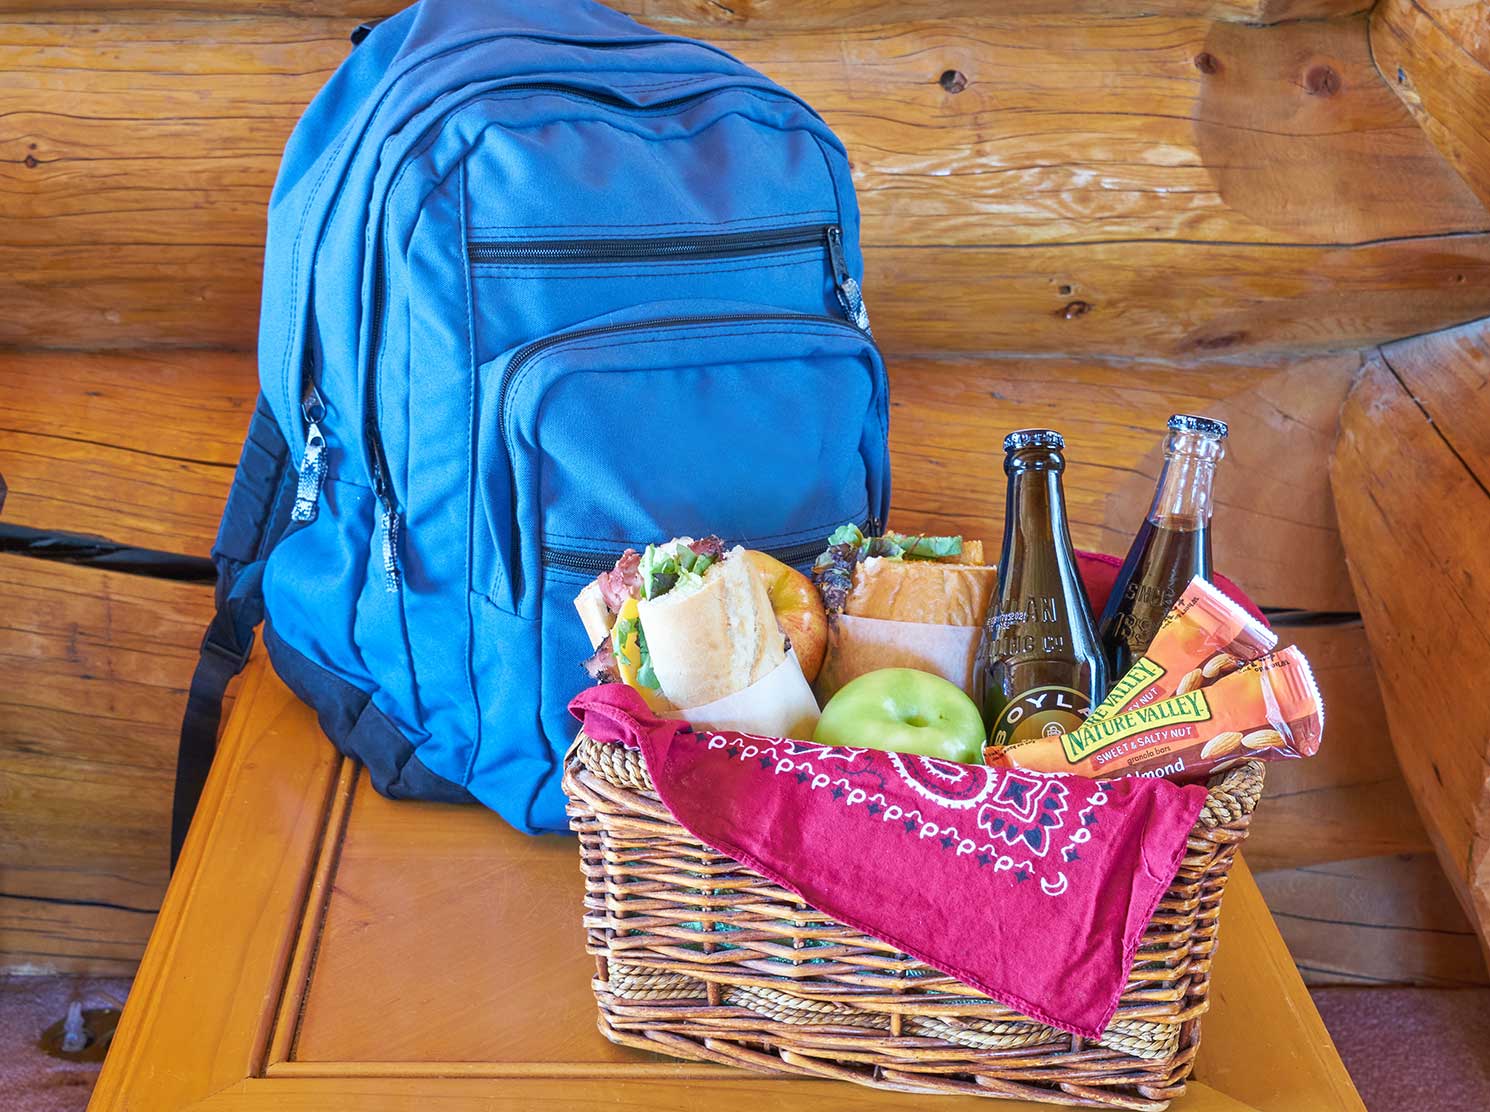 Trail lunch with basket or backpack